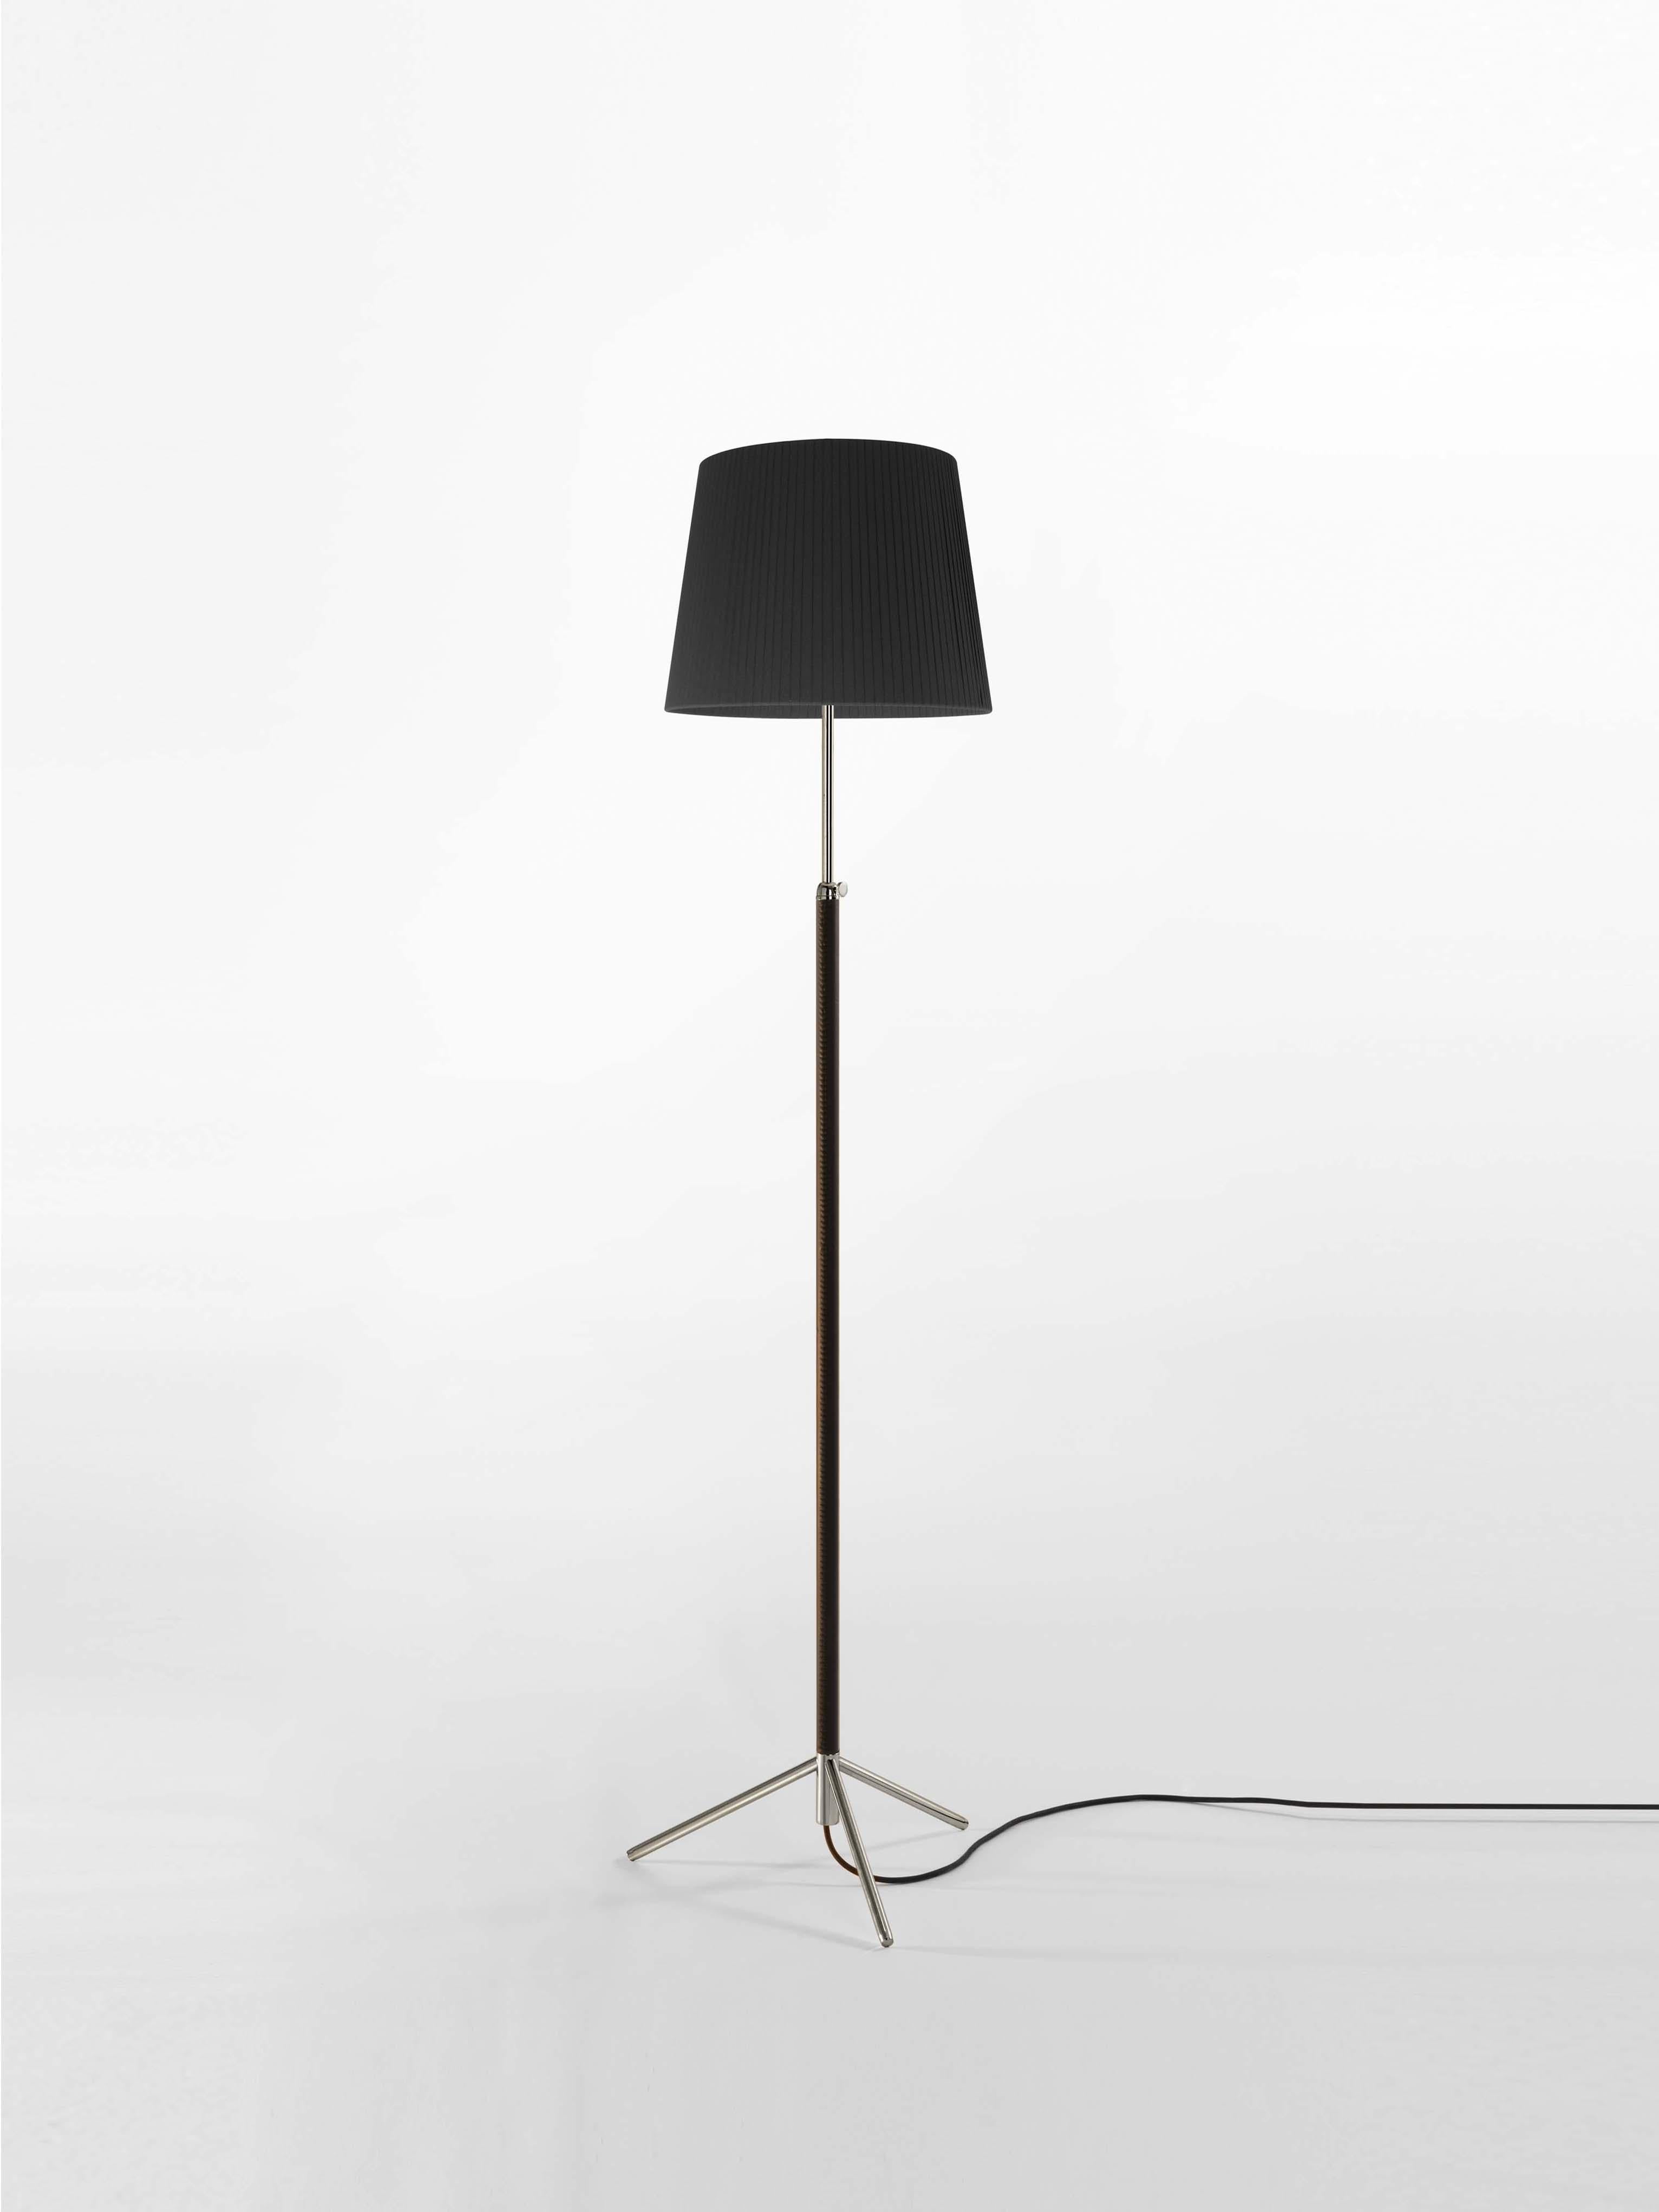 Black and Chrome Pie de Salón G3 floor lamp by Jaume Sans
Dimensions: D 40 x H 120-160 cm
Materials: Metal, leather, ribbon.
Available in chrome-plated or polished brass structure.
Available in other shade colors and sizes.

This slender